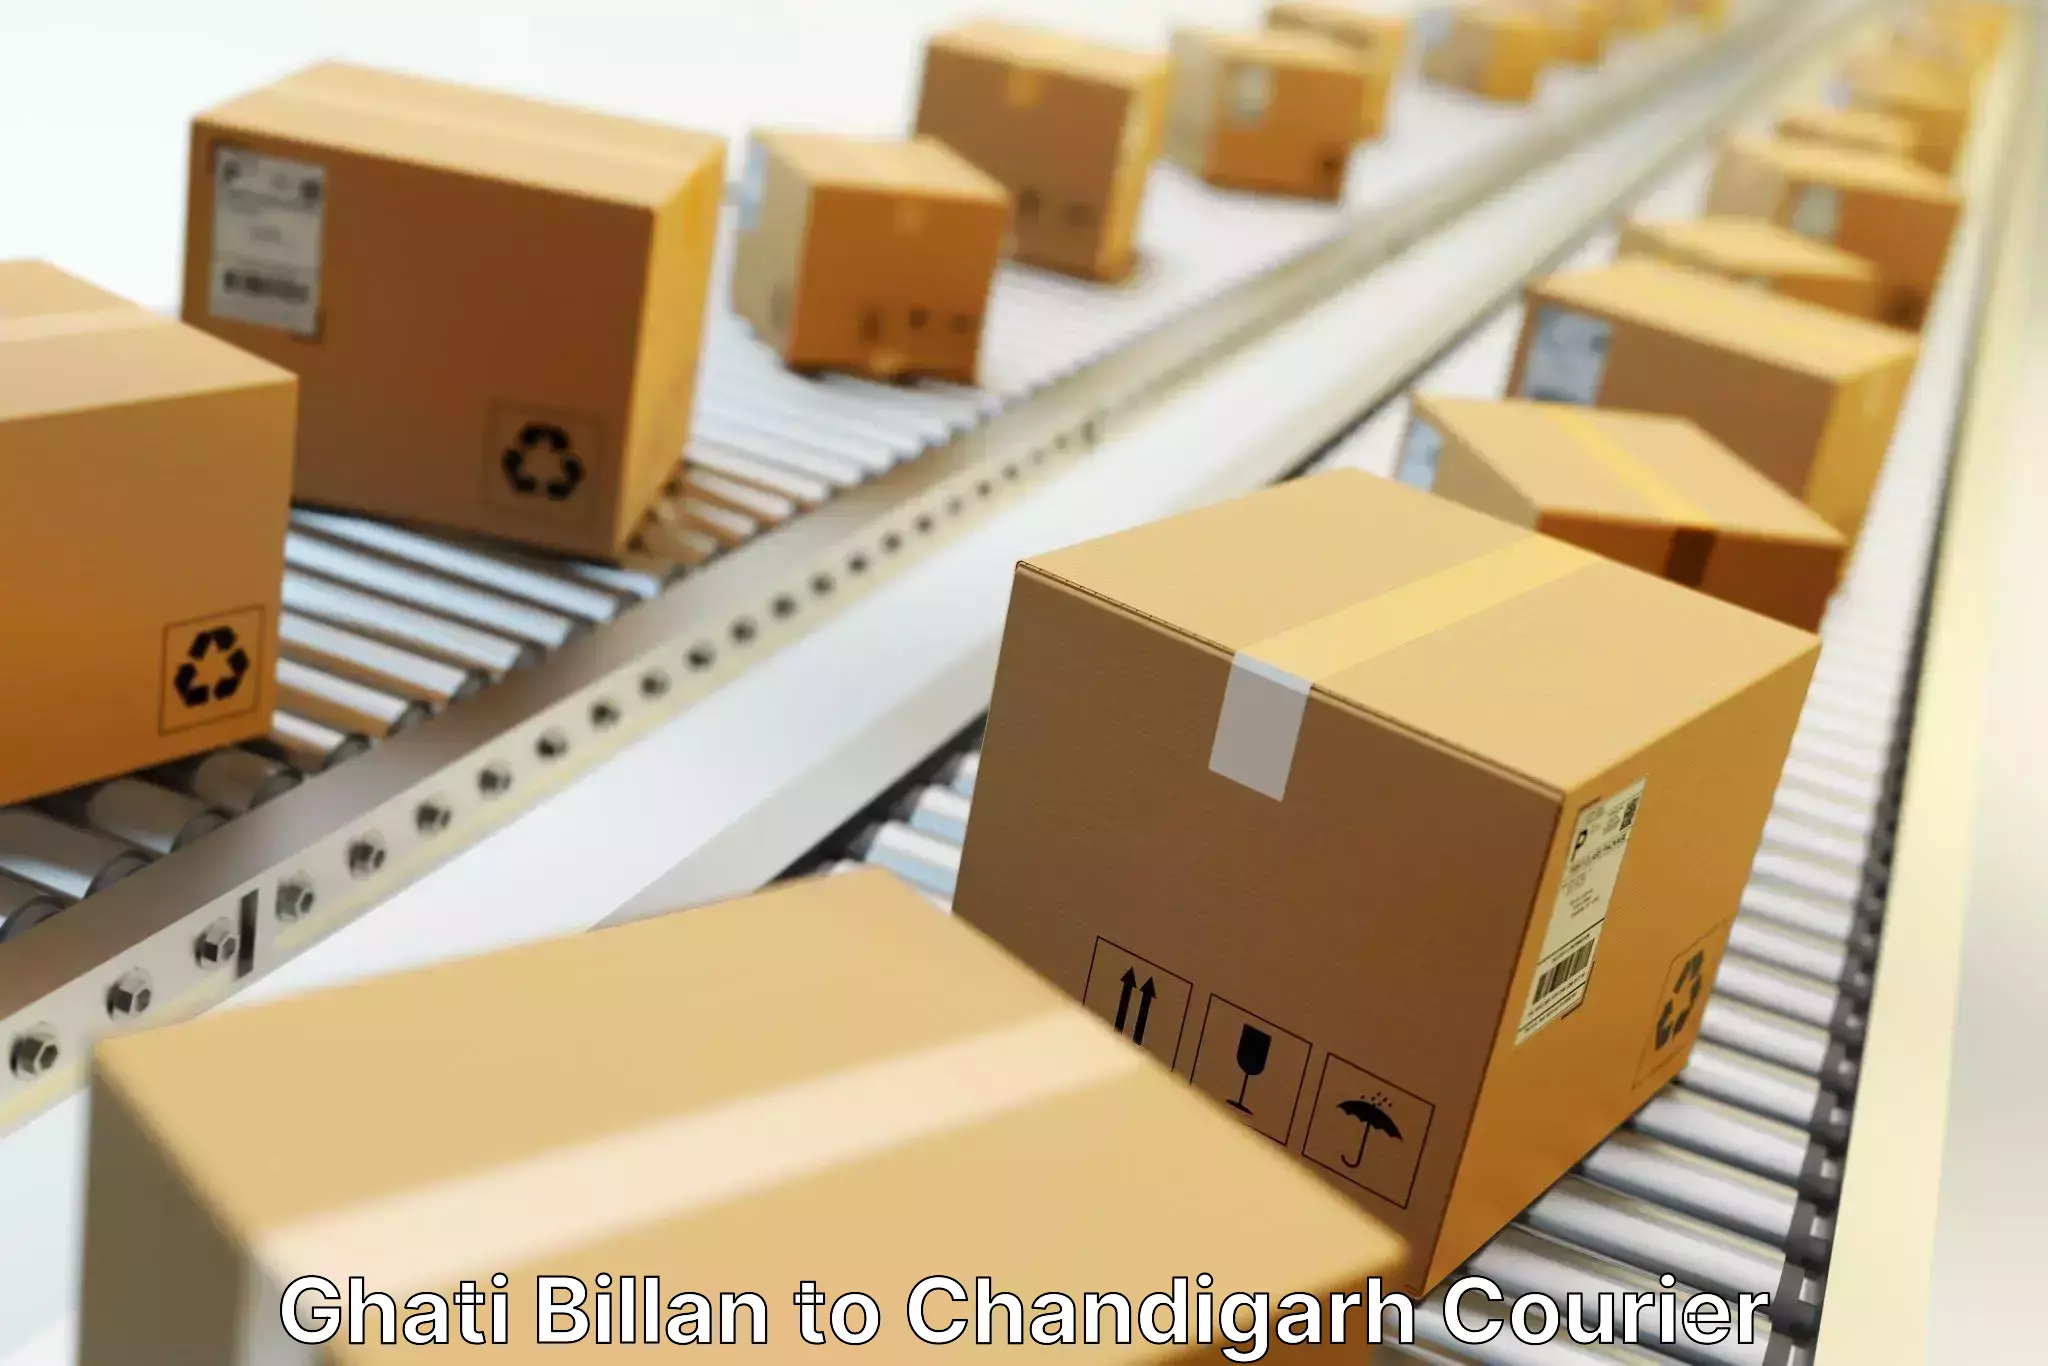 Express delivery capabilities Ghati Billan to Chandigarh